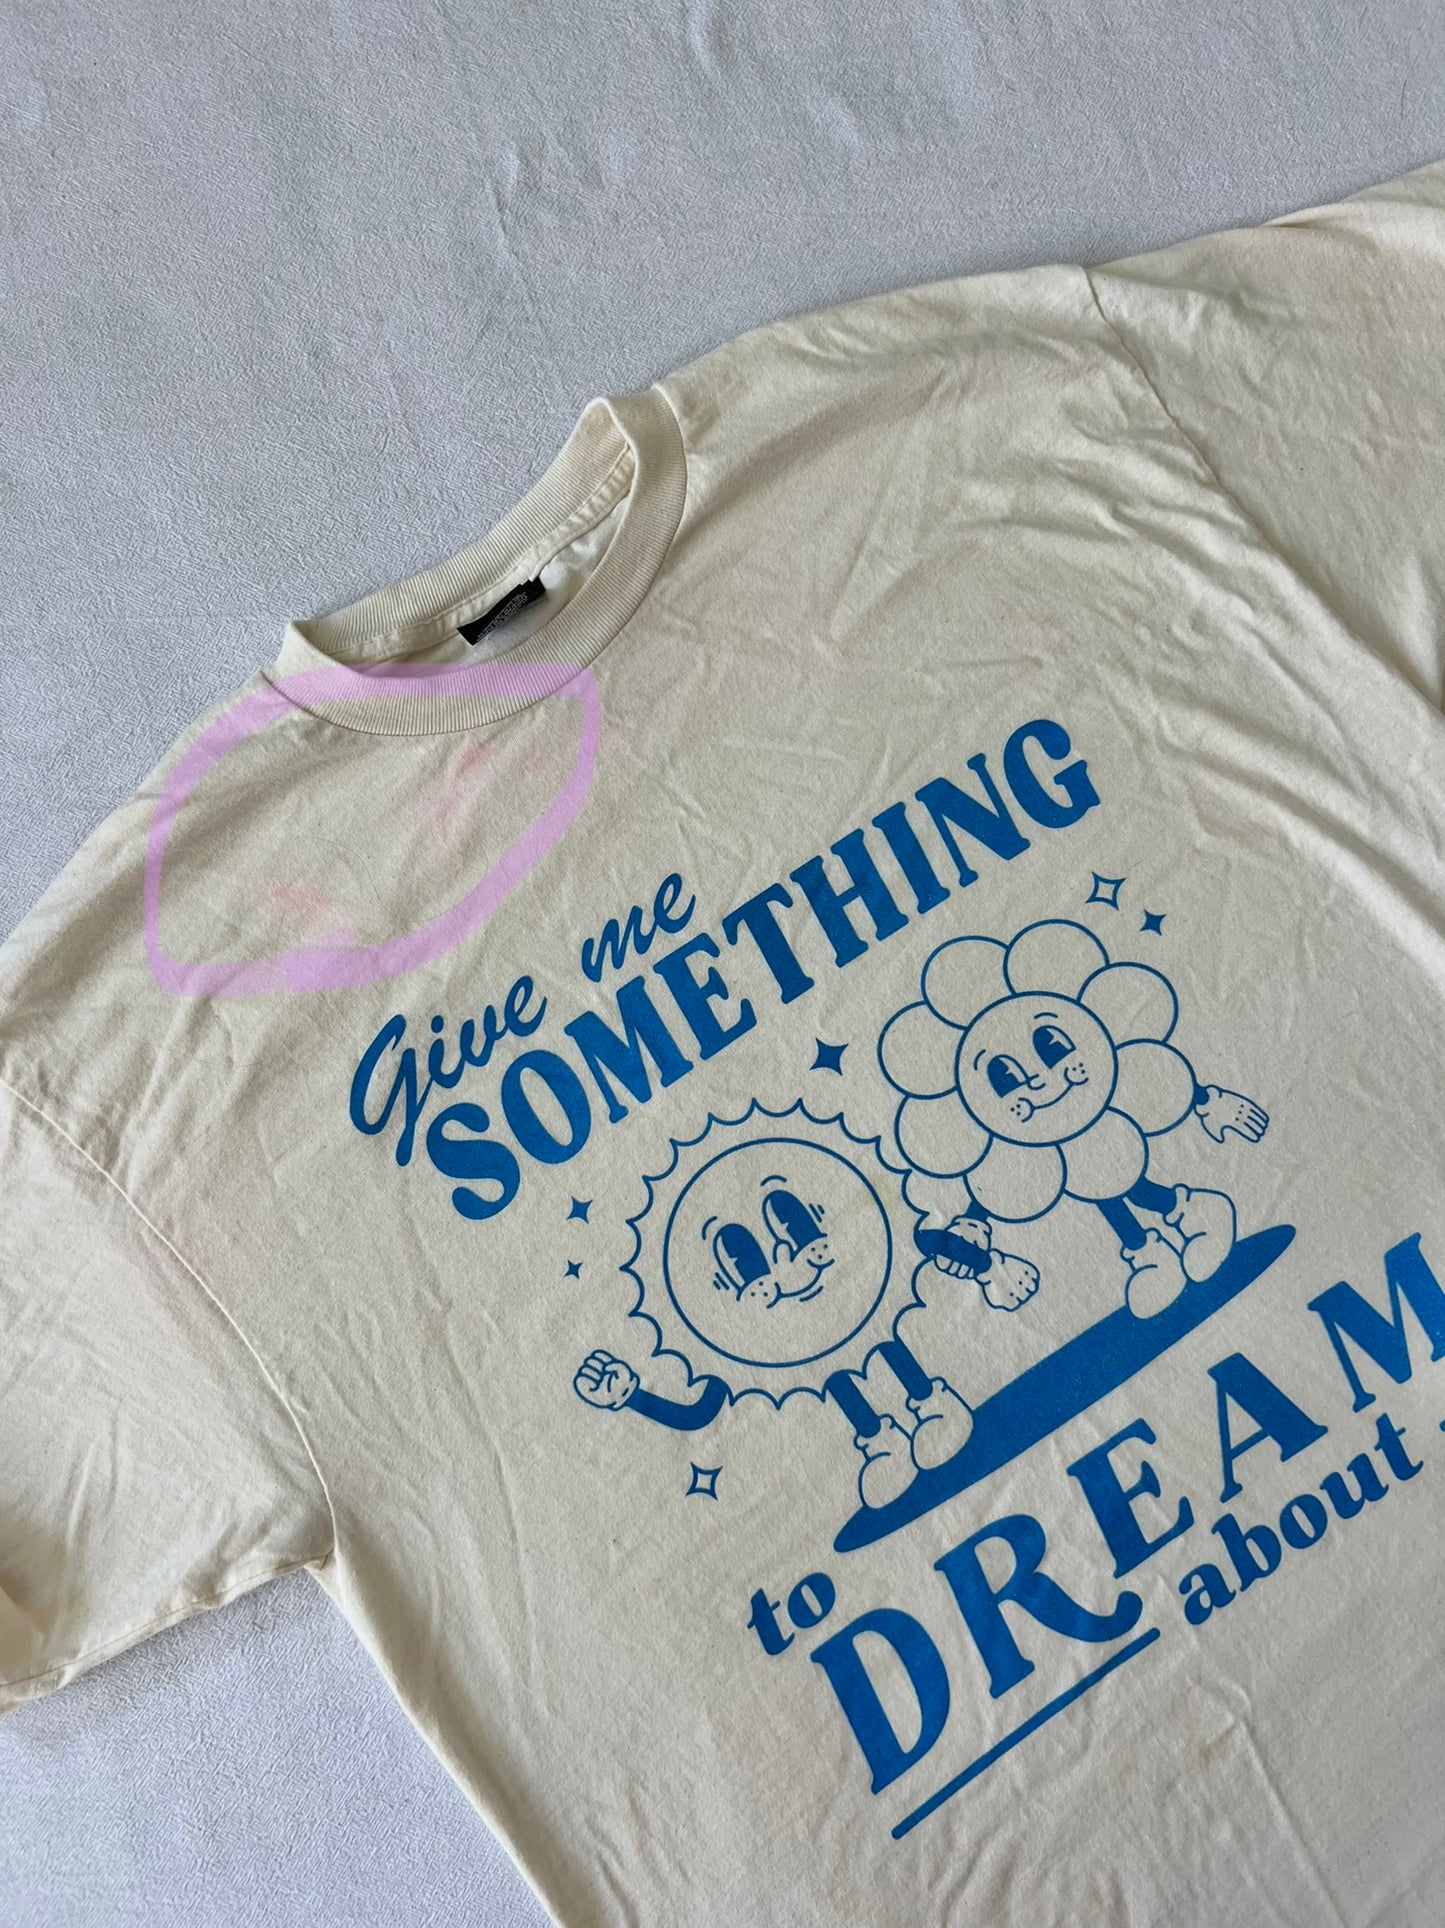 Daydreaming Tee: Size L (OOPSIE SHIRT)